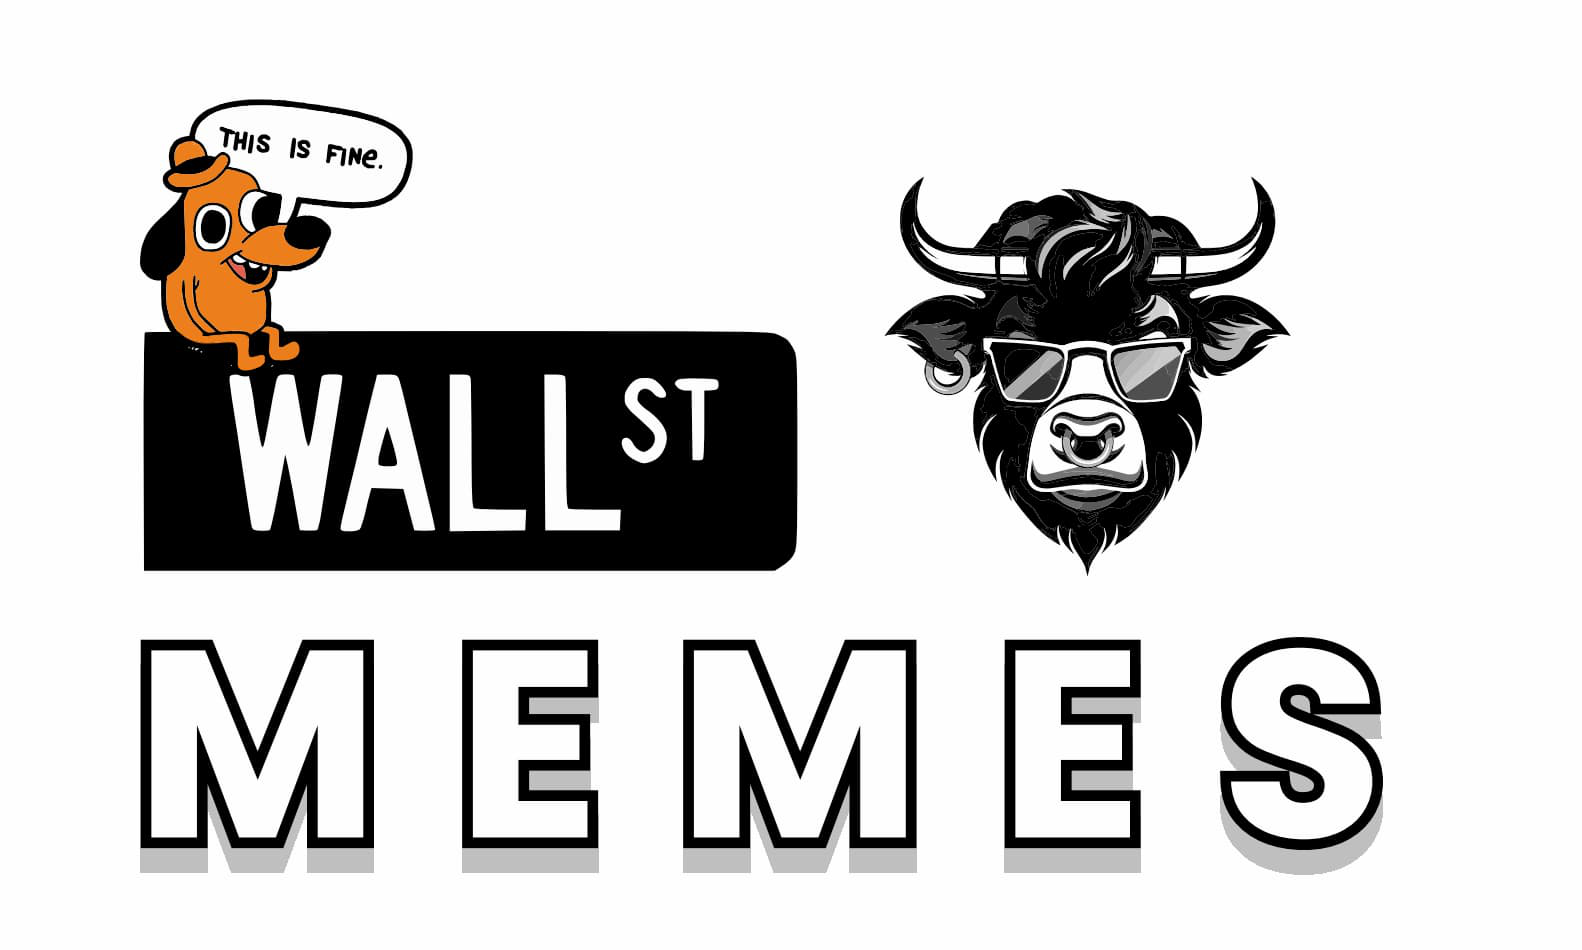 Next Cryptocurrency to Explode Tuesday 19 September – Wall Street Memes, eCash, Stacks